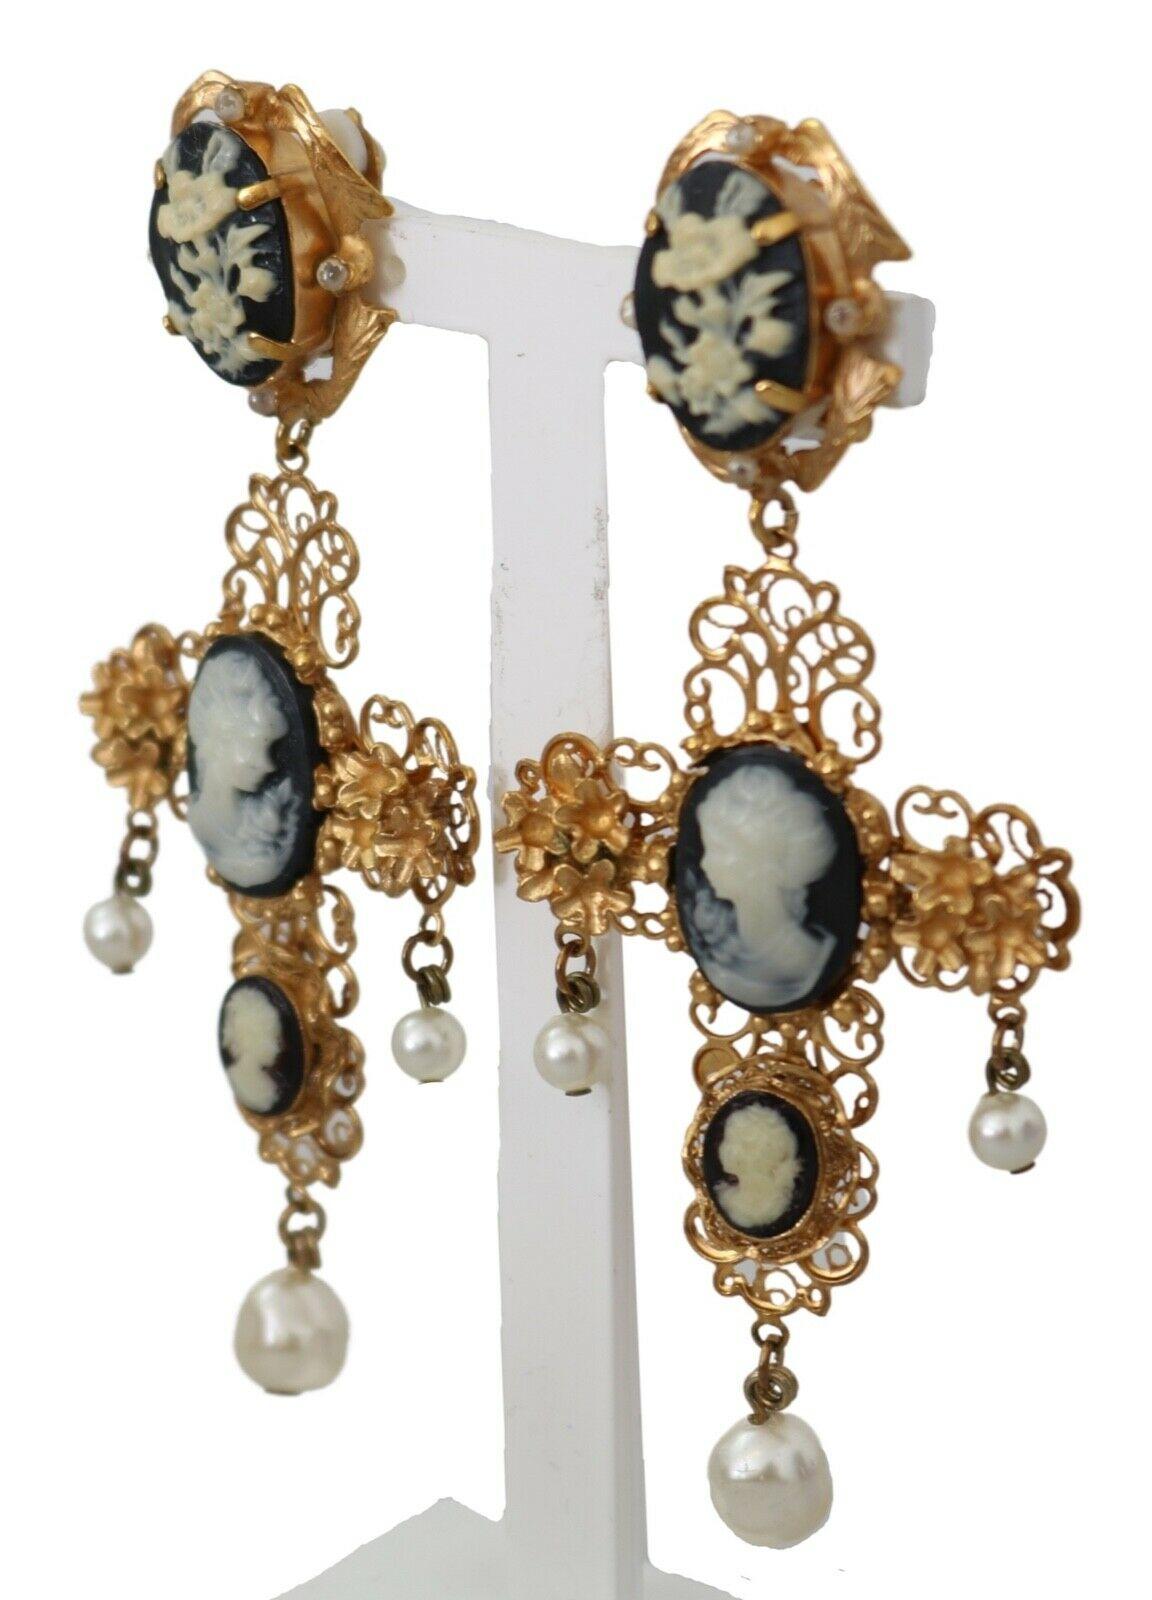  Gorgeous brand new with tags, 100% Authentic Dolce & Gabbana gold tone filigree flower and women cross earrings.




Model: Clip-on, dangling
Motive: Filigree, floral
Material: Brass, crystals

Color: Gold, black
Logo details
Made in